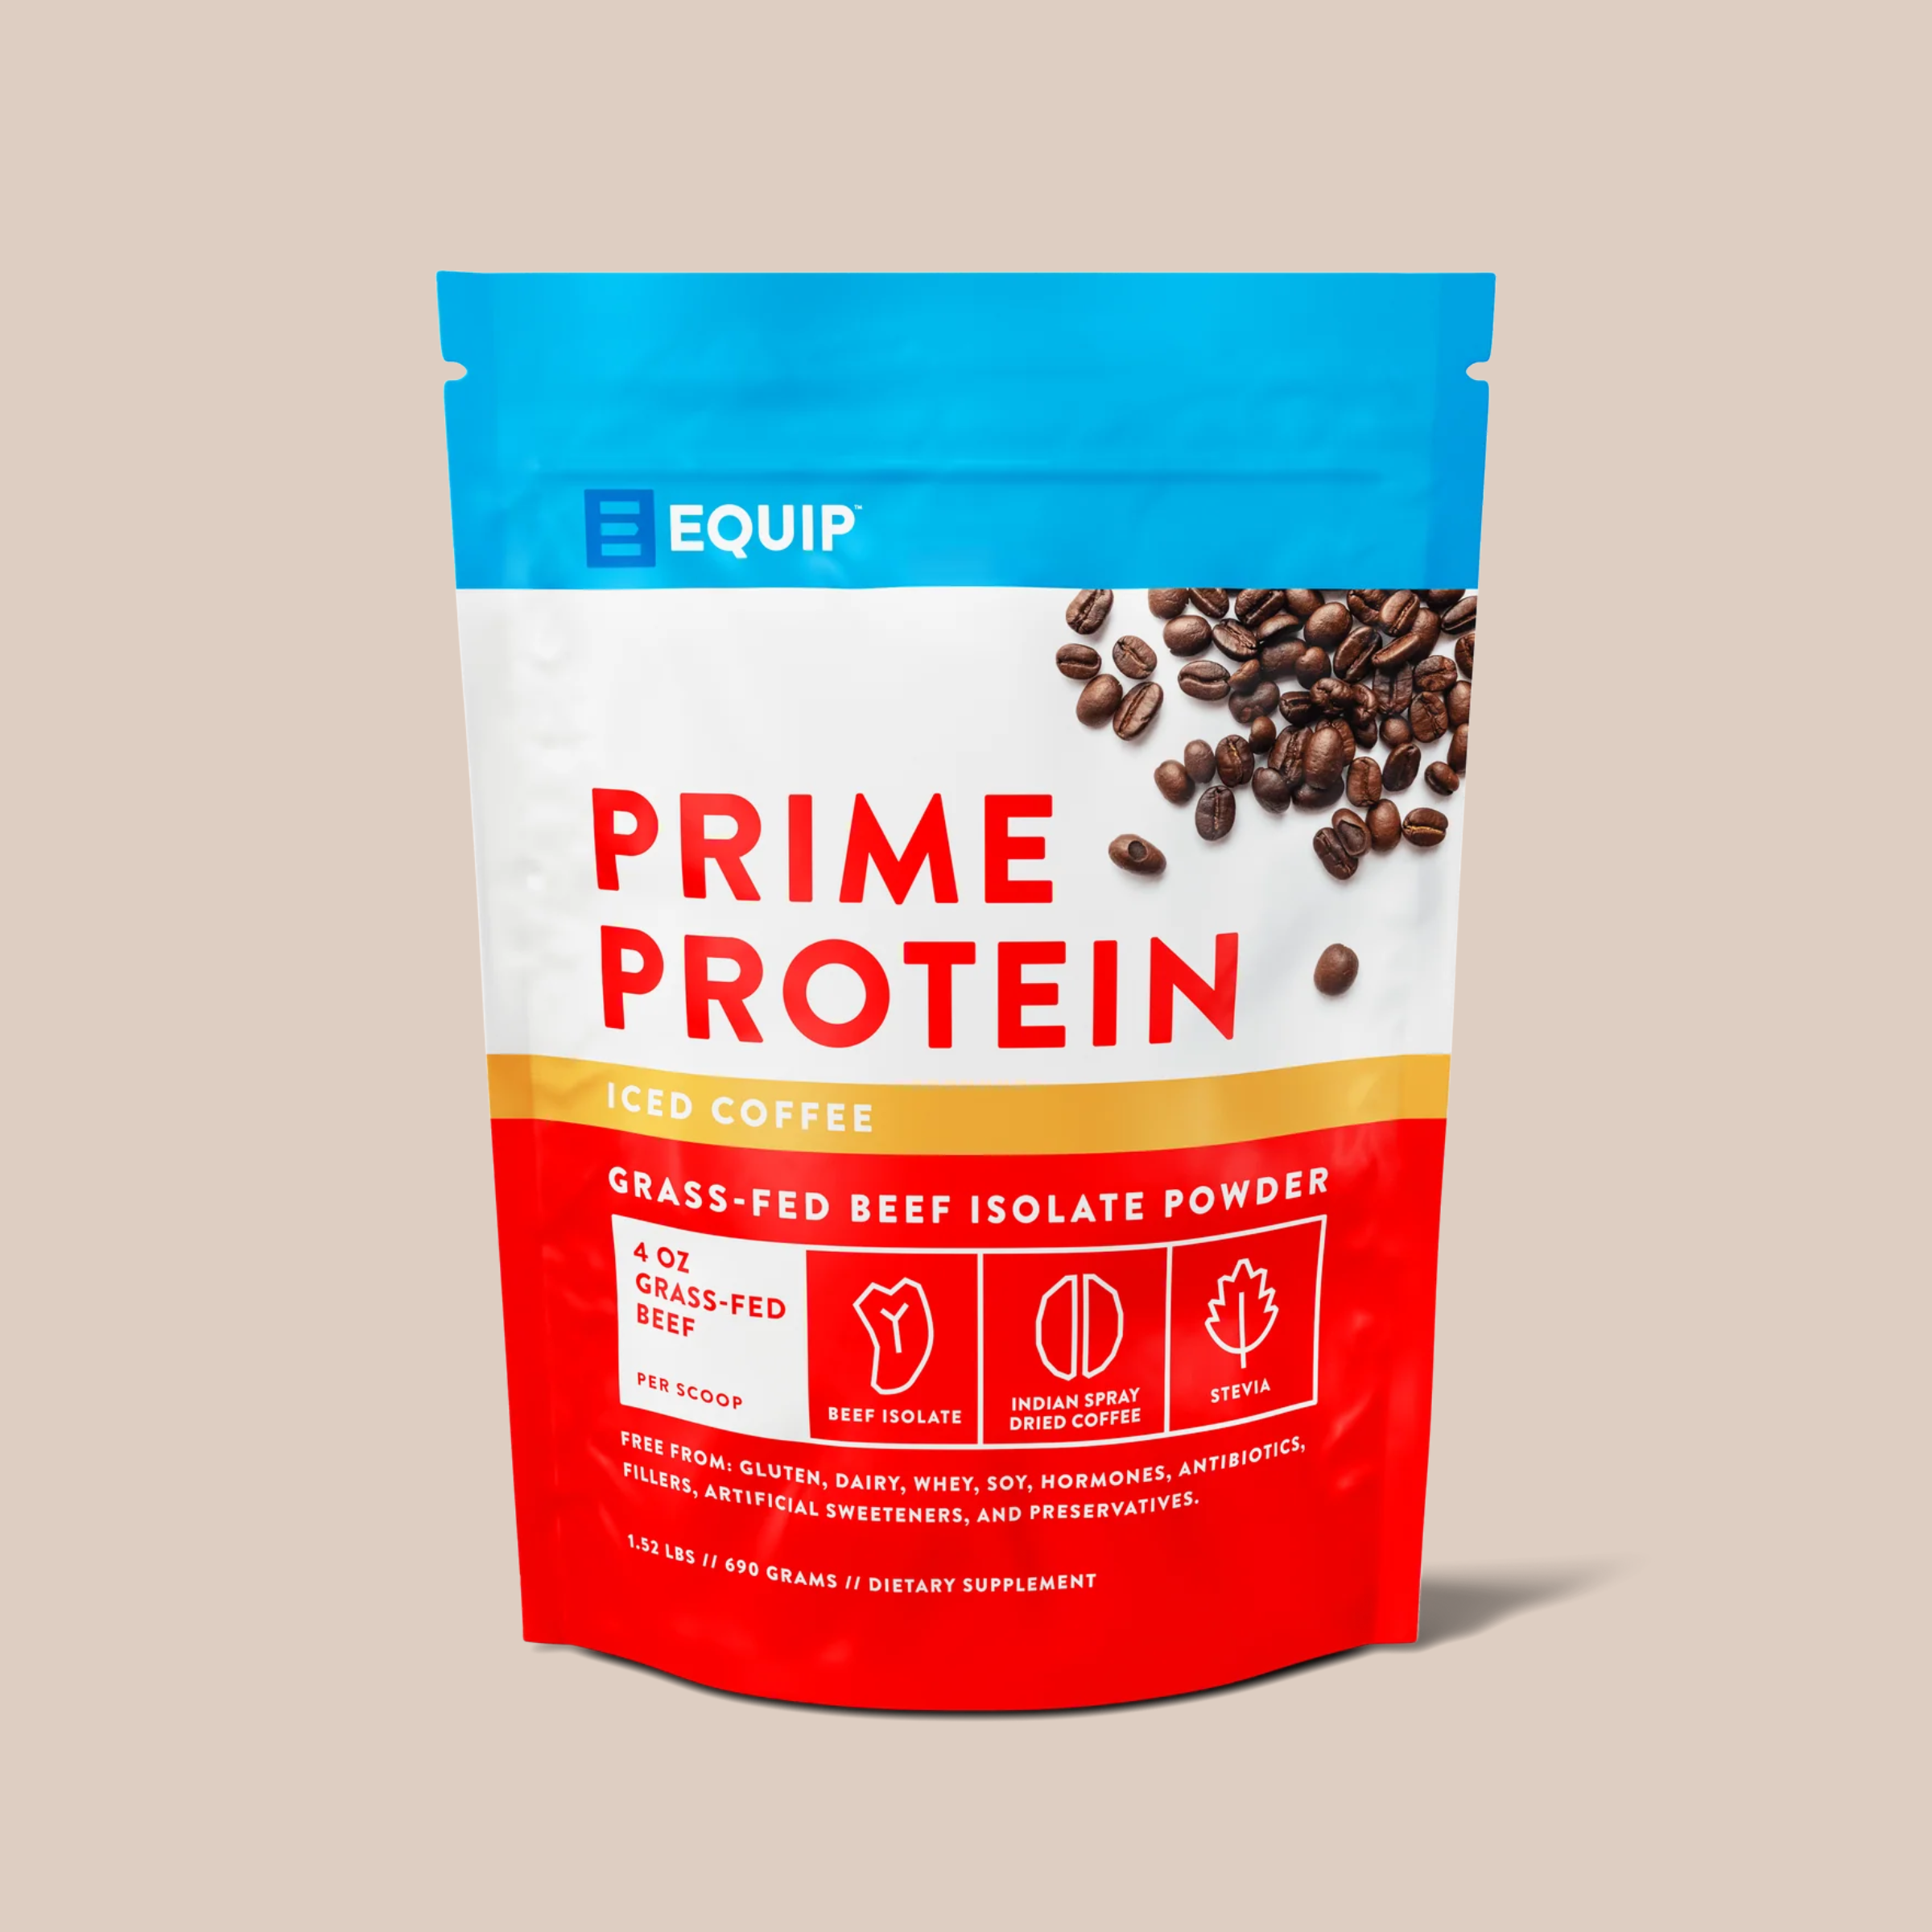 Prime Protein - Iced Coffee